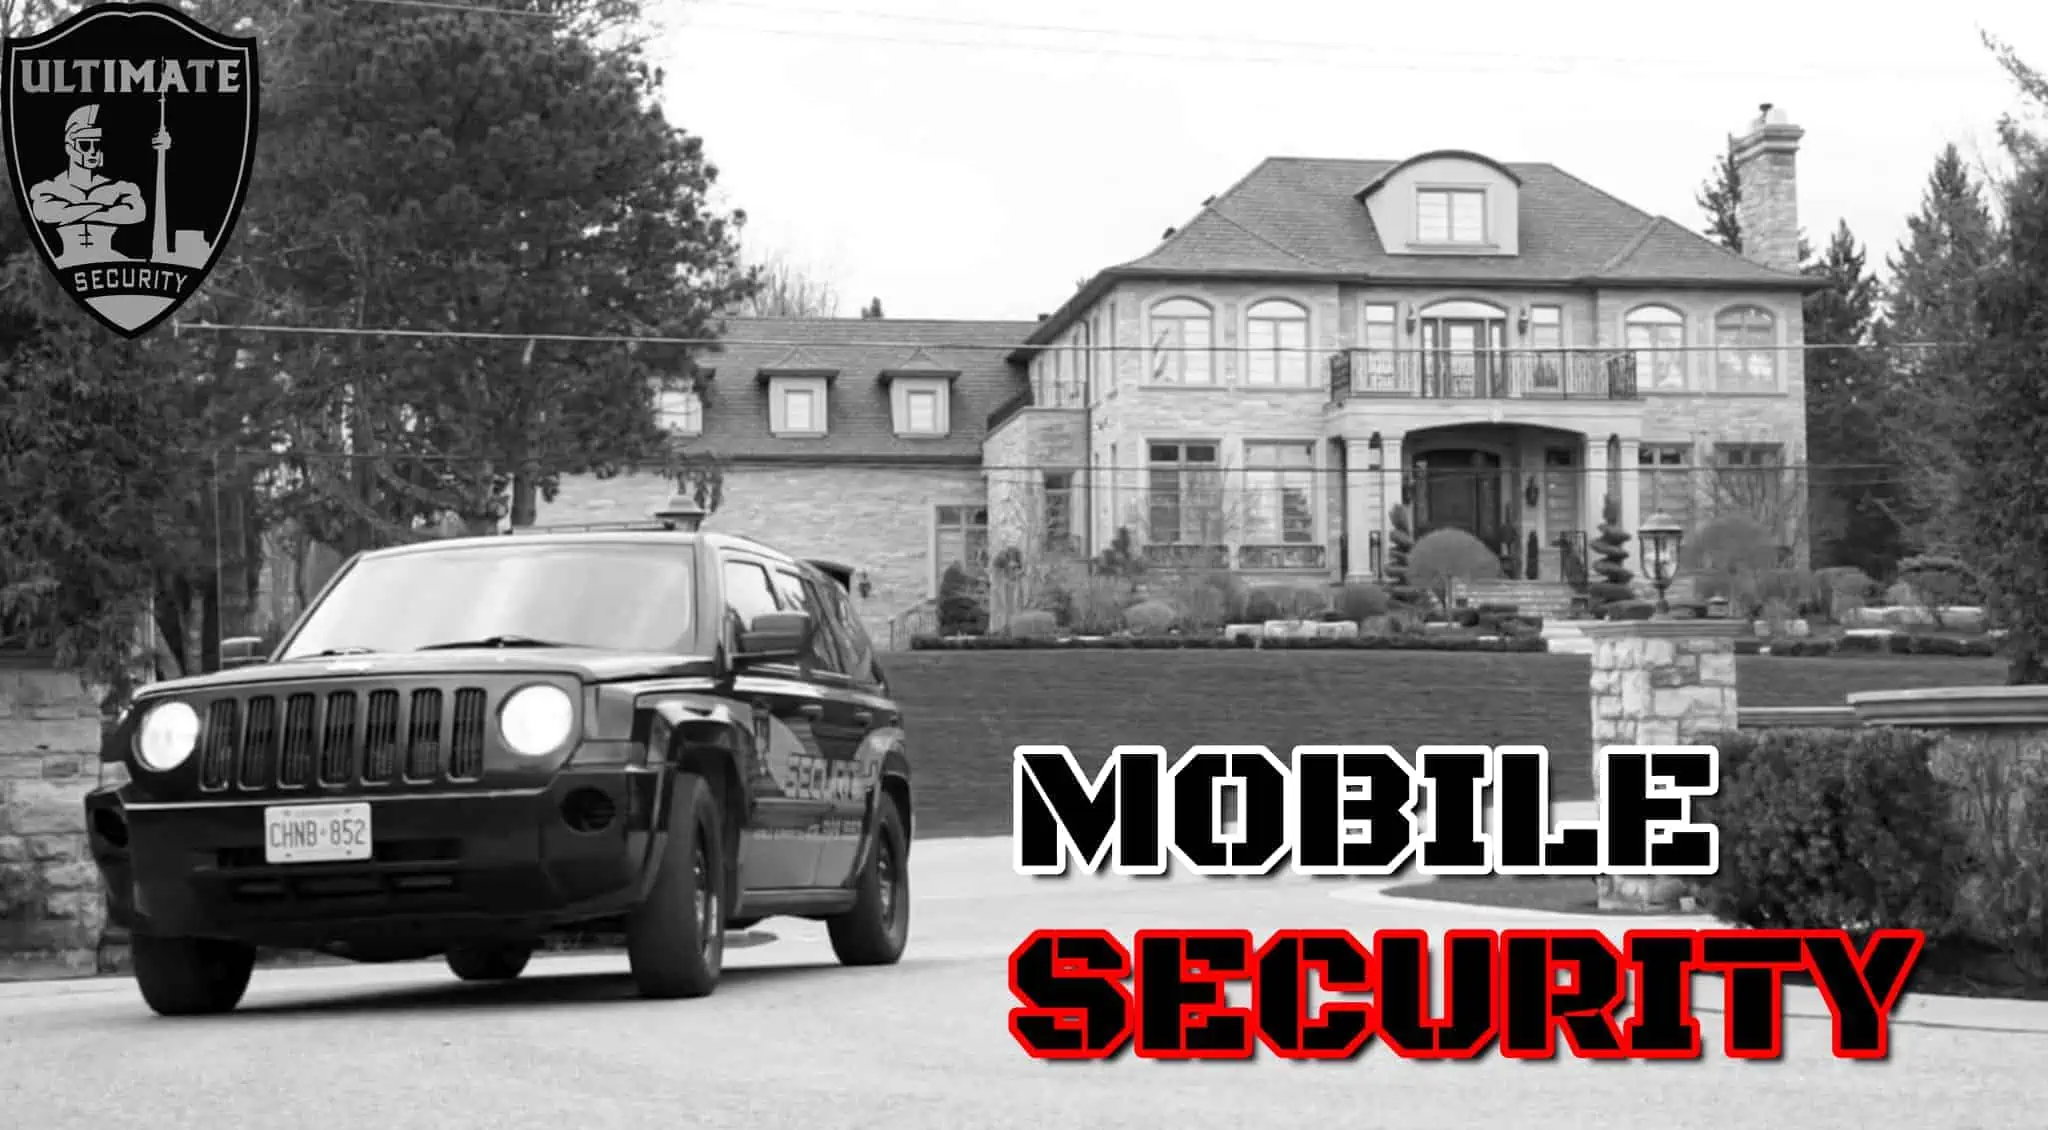 A black SUV, with the words "mobile security", drives in front of a house.